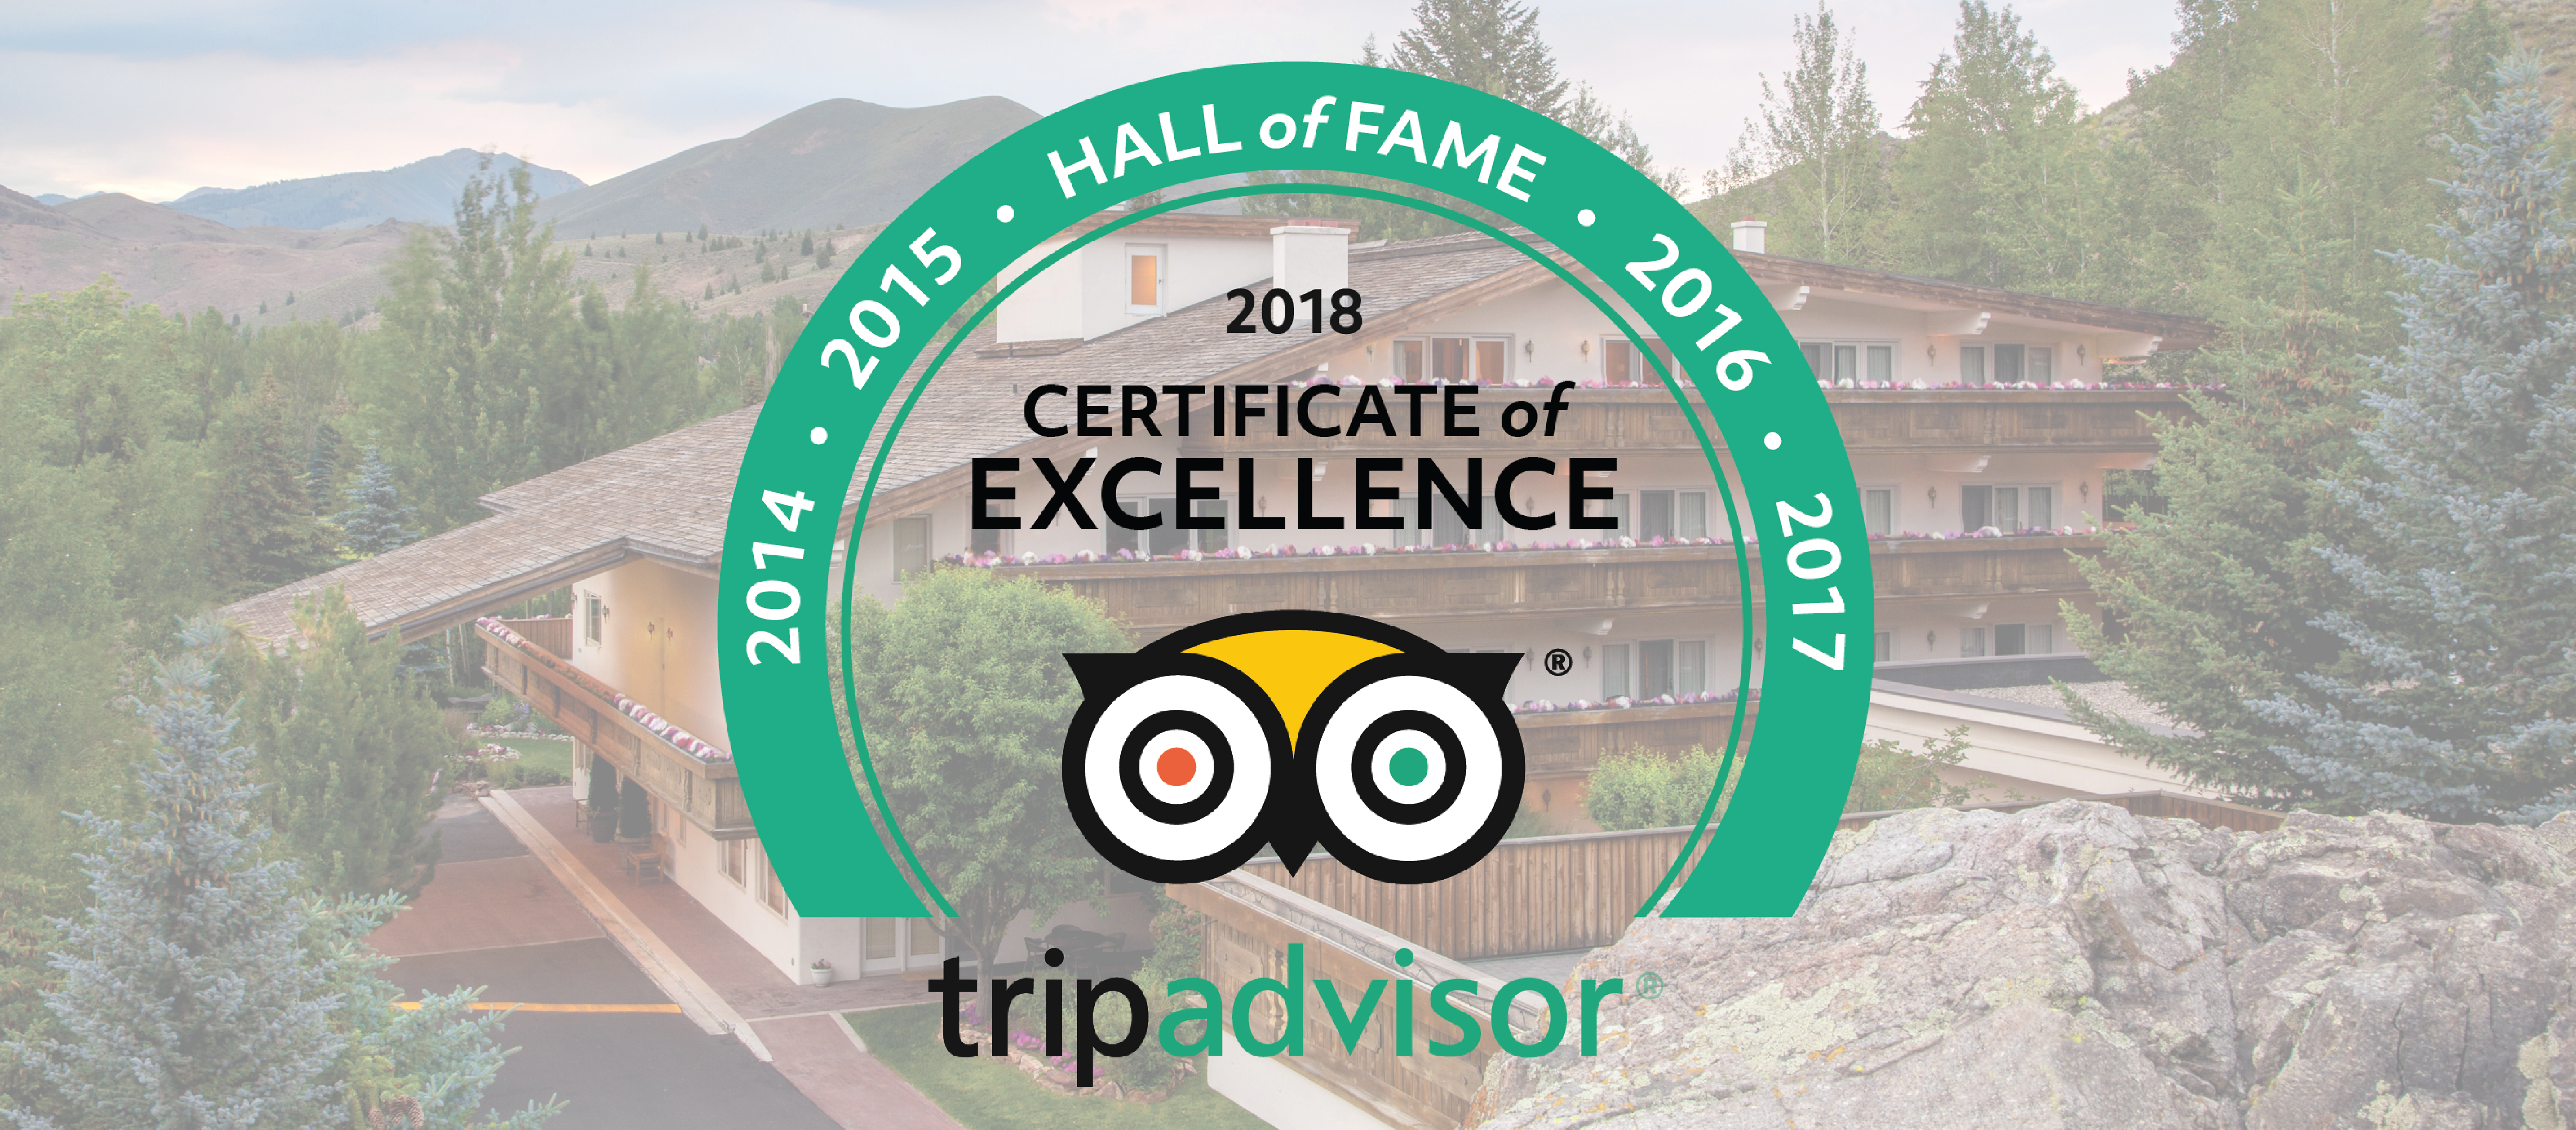 Trip Advisor 2018 Certificate of Excellence